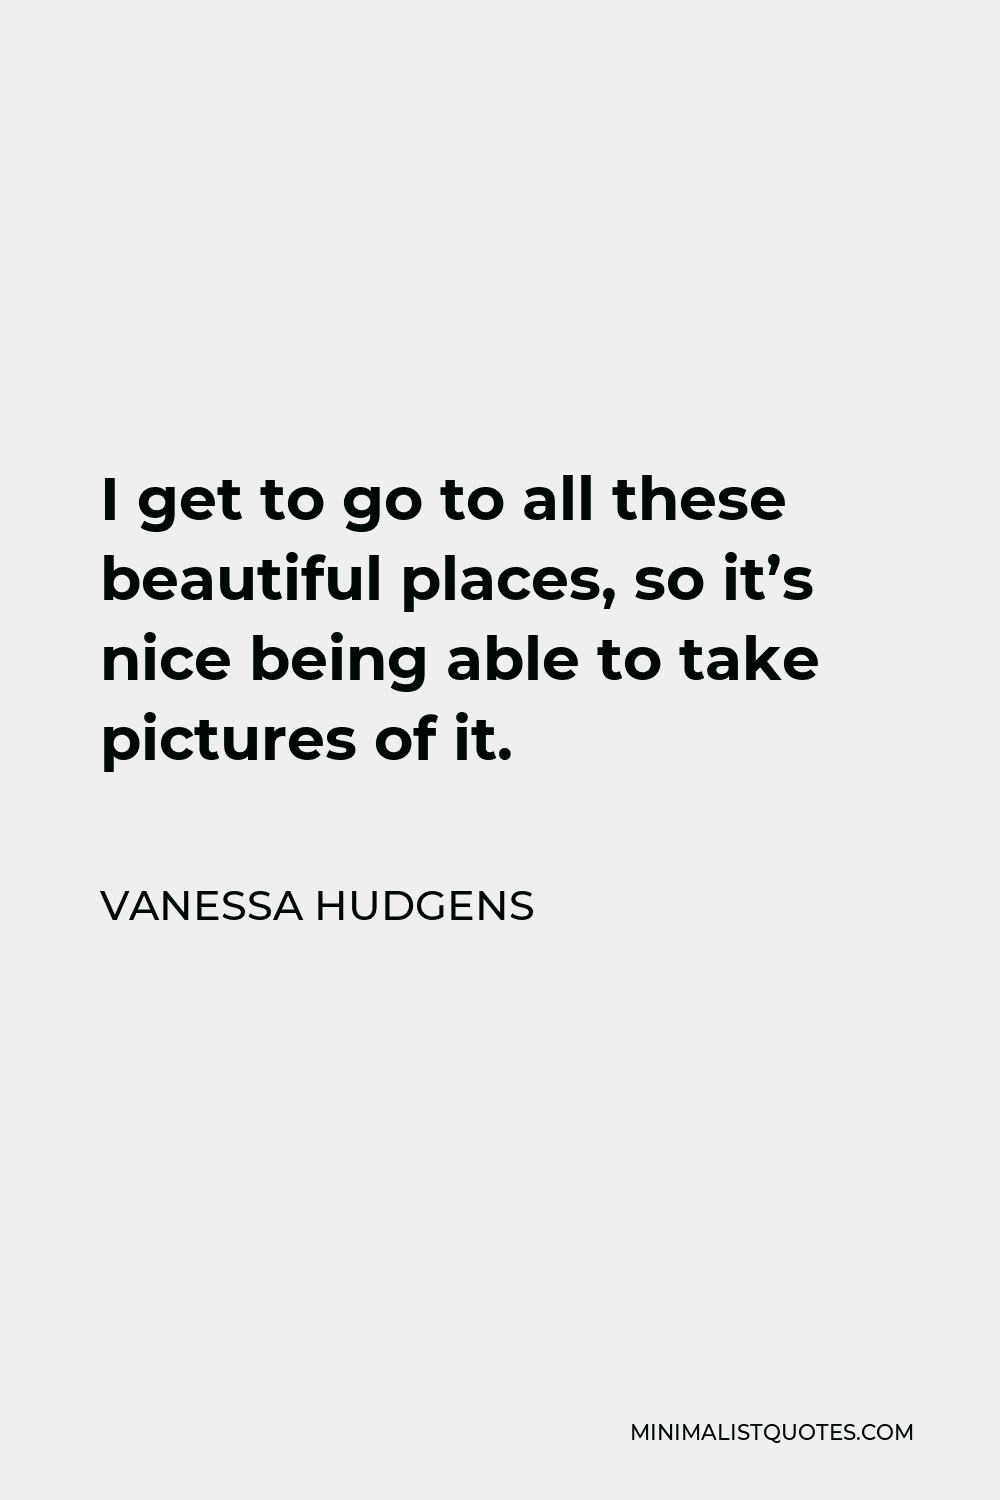 Vanessa Hudgens Quote - I get to go to all these beautiful places, so it’s nice being able to take pictures of it.